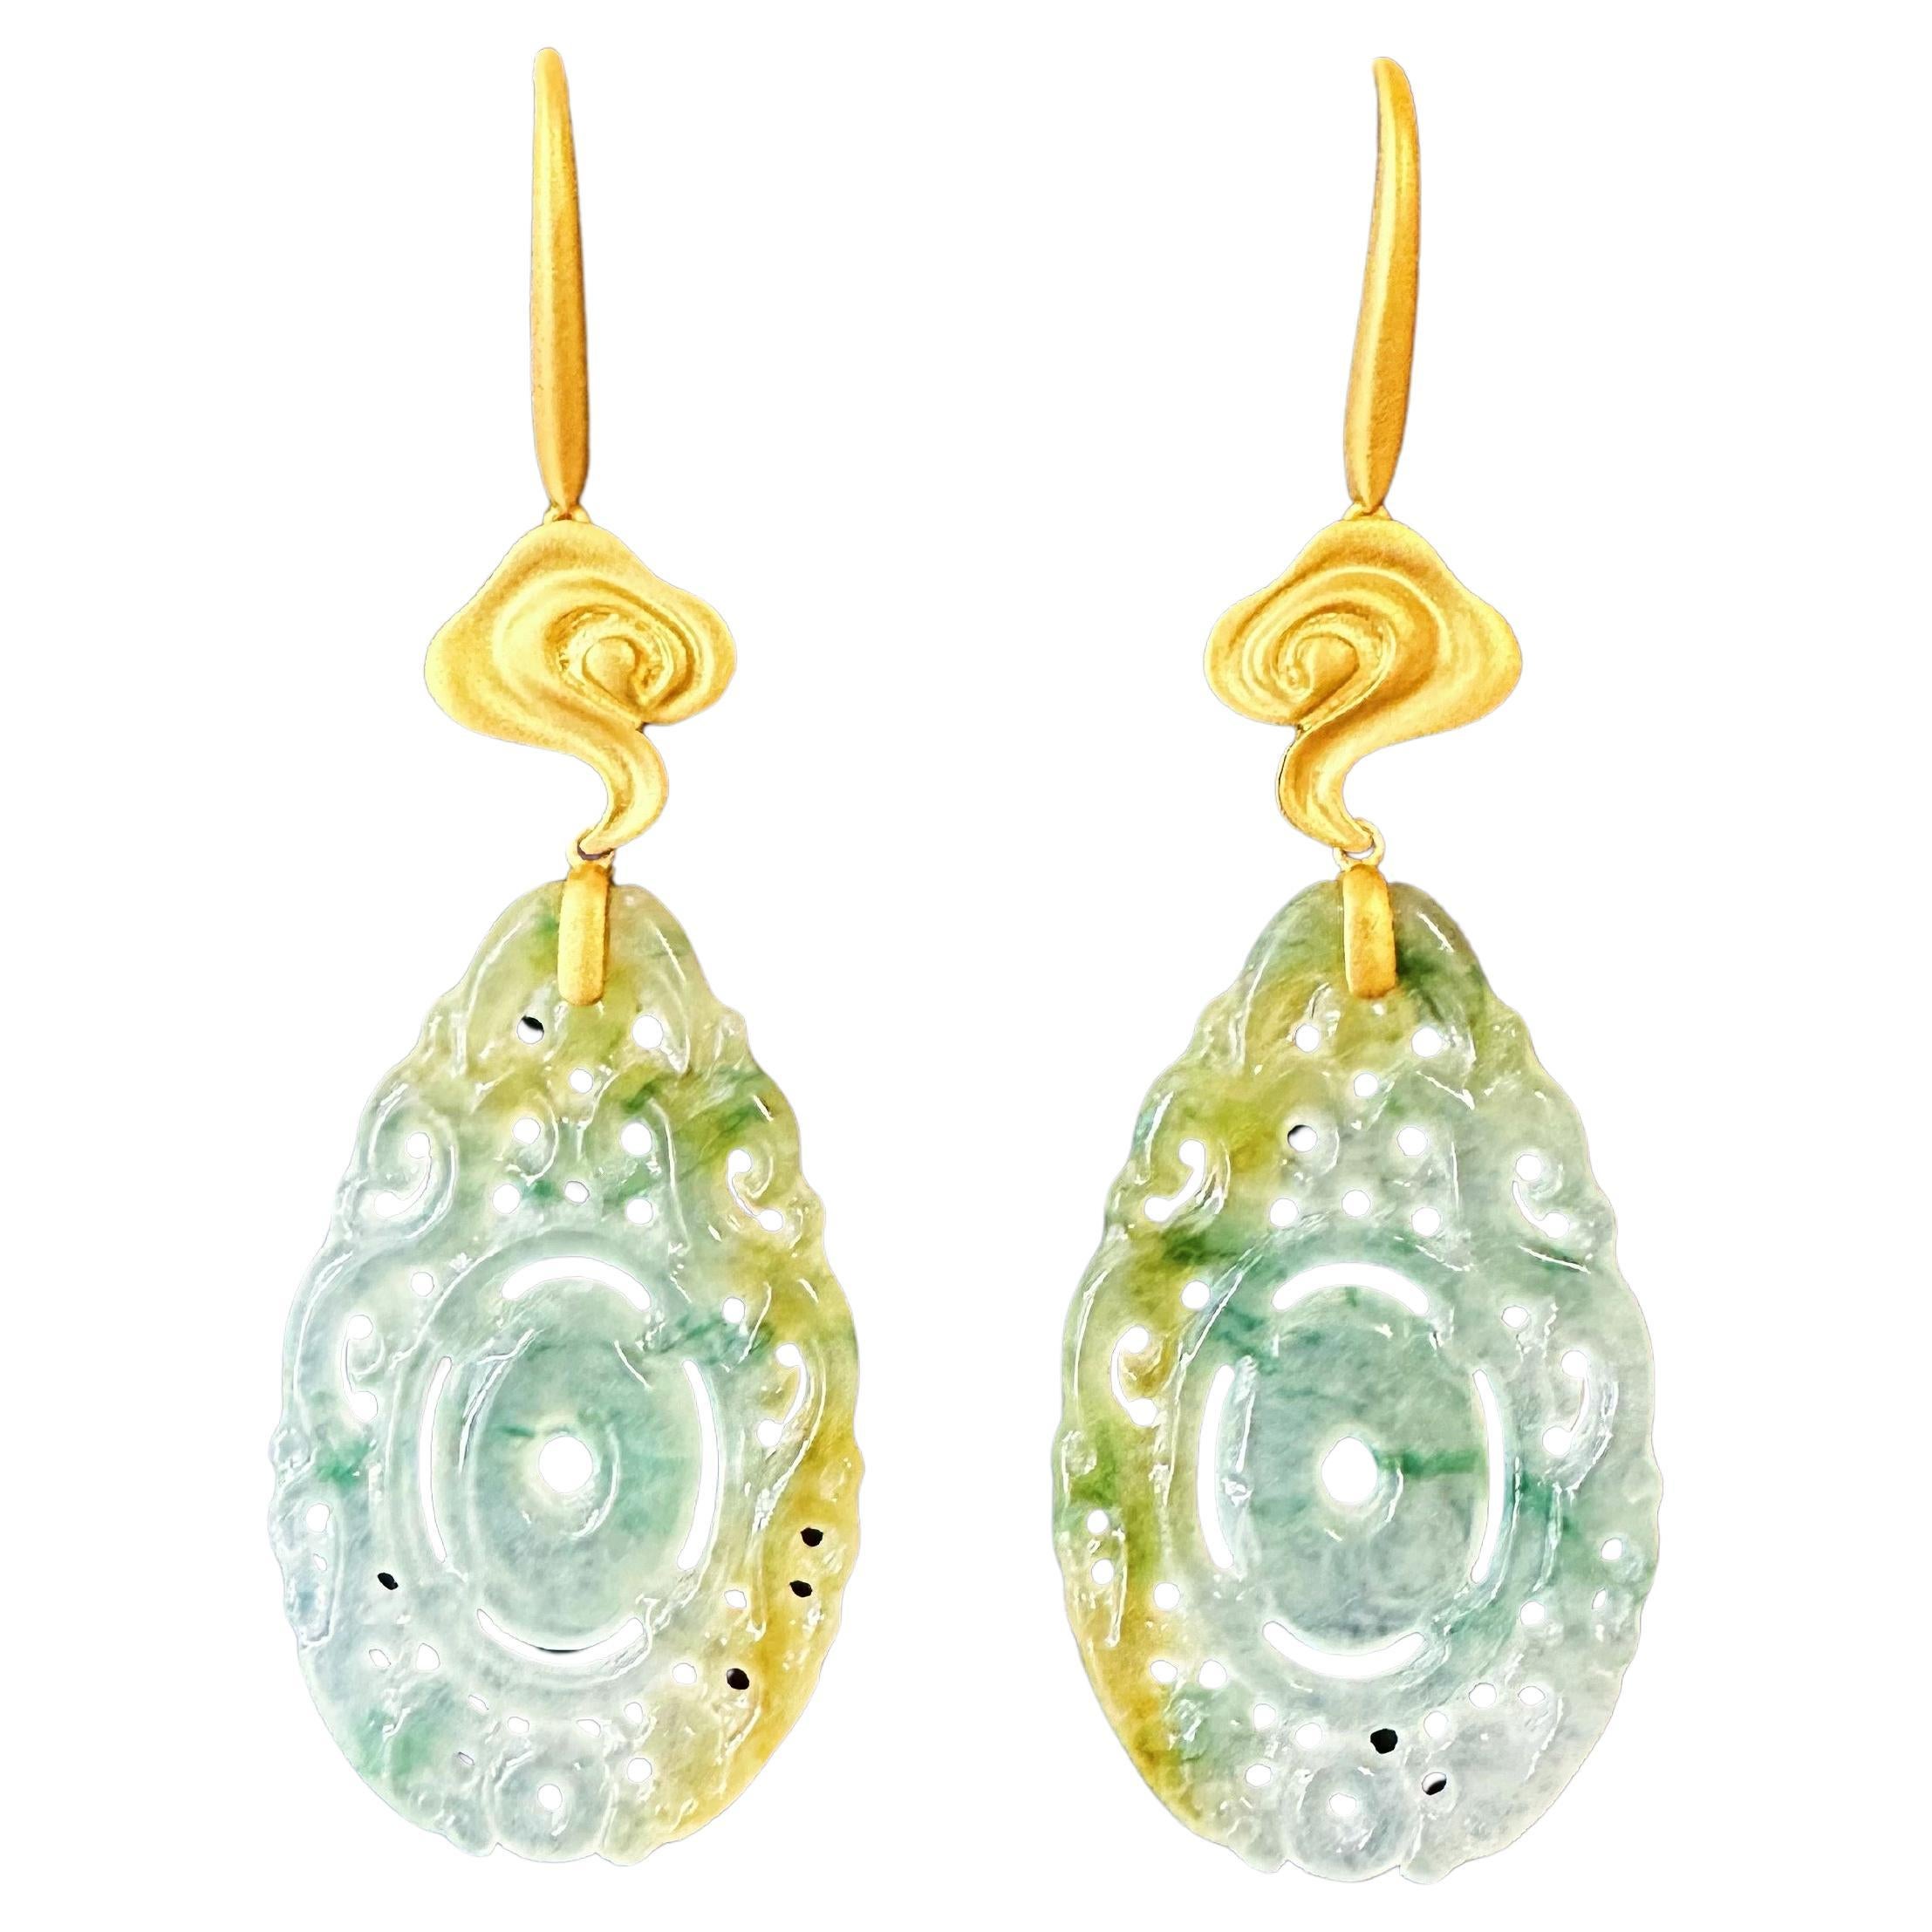 Introducing our extraordinary bicolor jade earrings, a pinnacle of refined elegance and timeless sophistication. These exquisitely handcrafted earrings feature meticulously selected icy-type jade pieces, meticulously shaped to perfection.

These